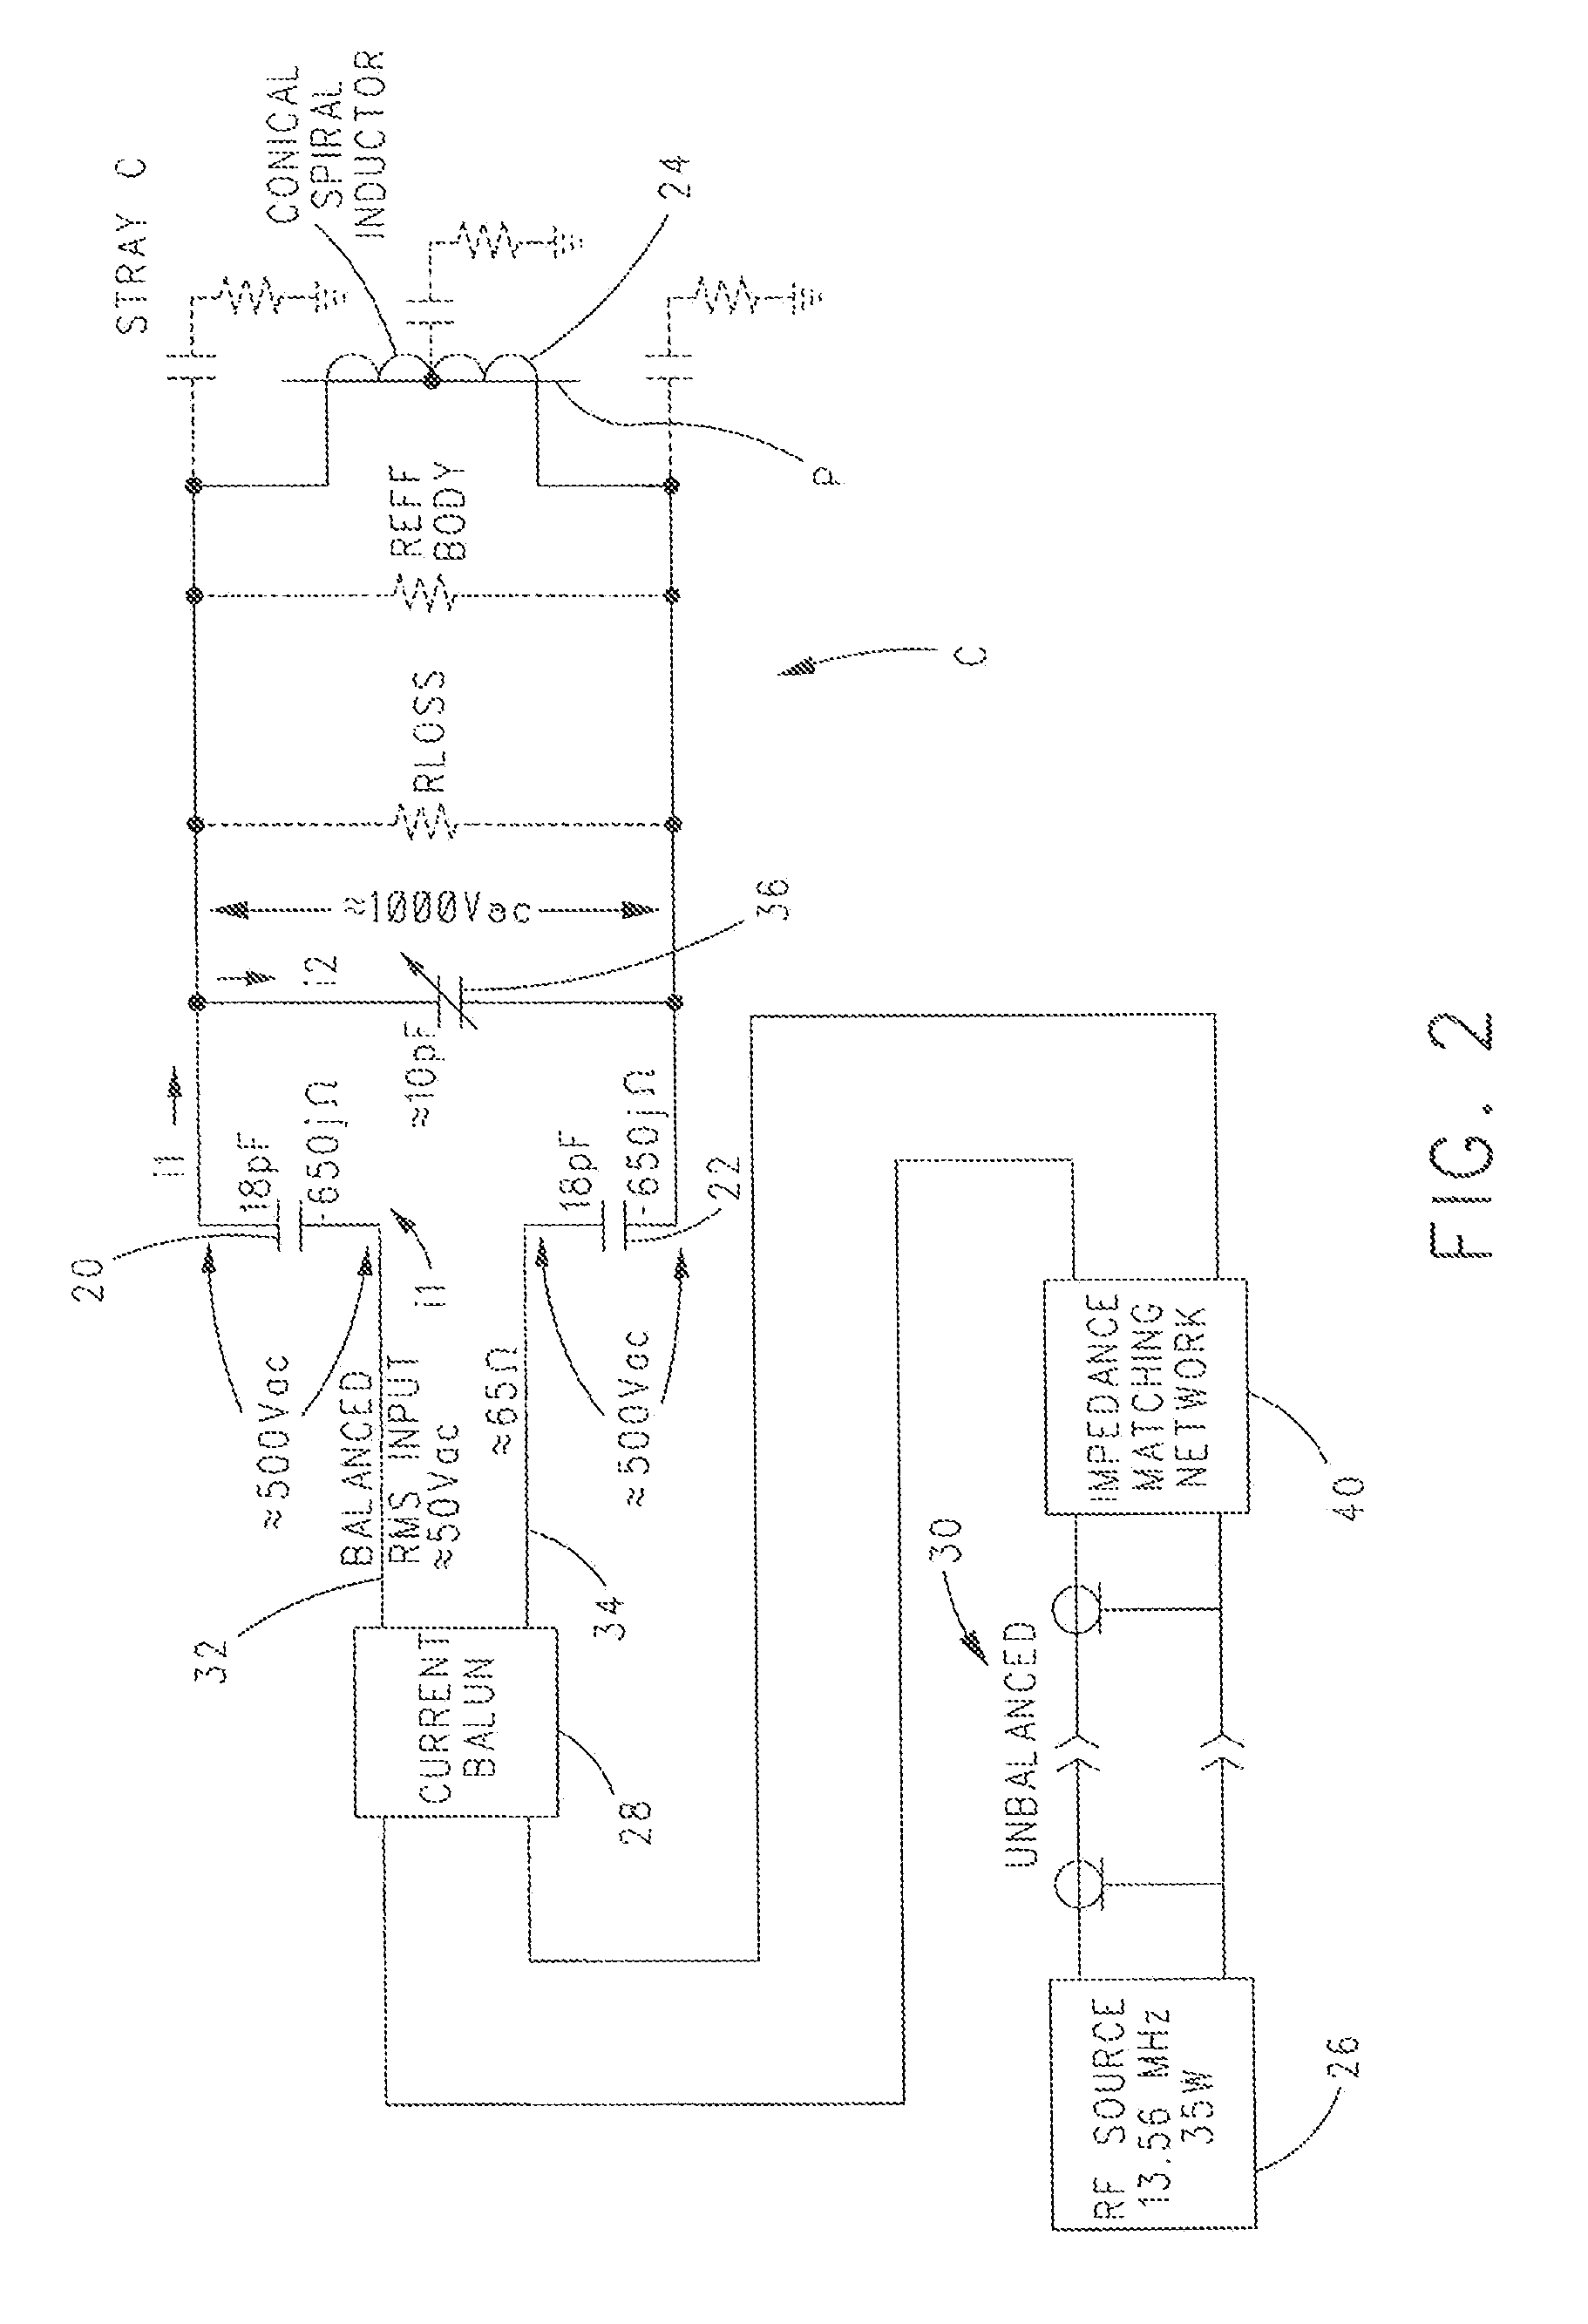 Coupling method for resonant diathermy and other bio-tissue heating applicators